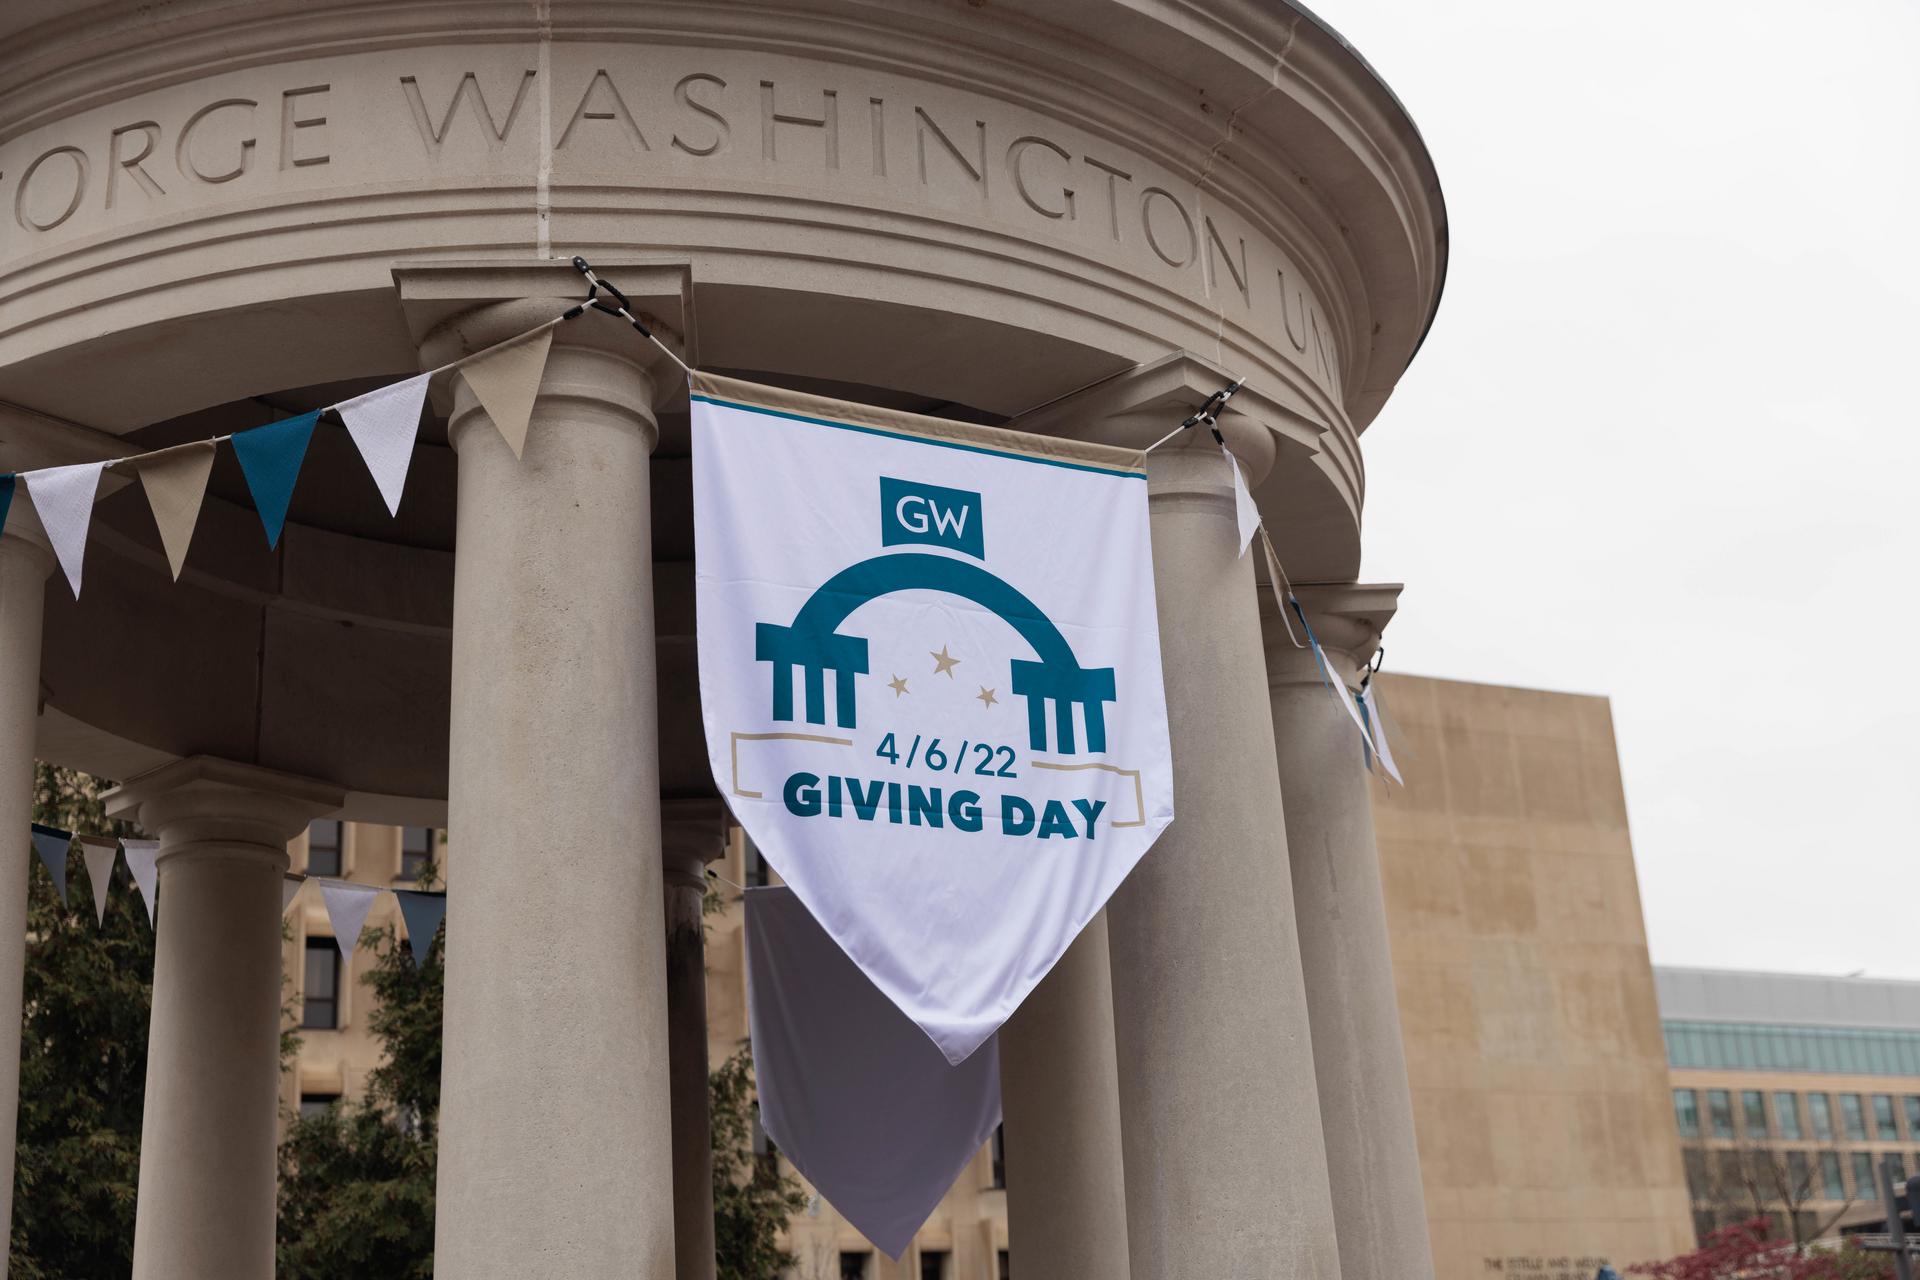 Tempietto with Giving Day banner